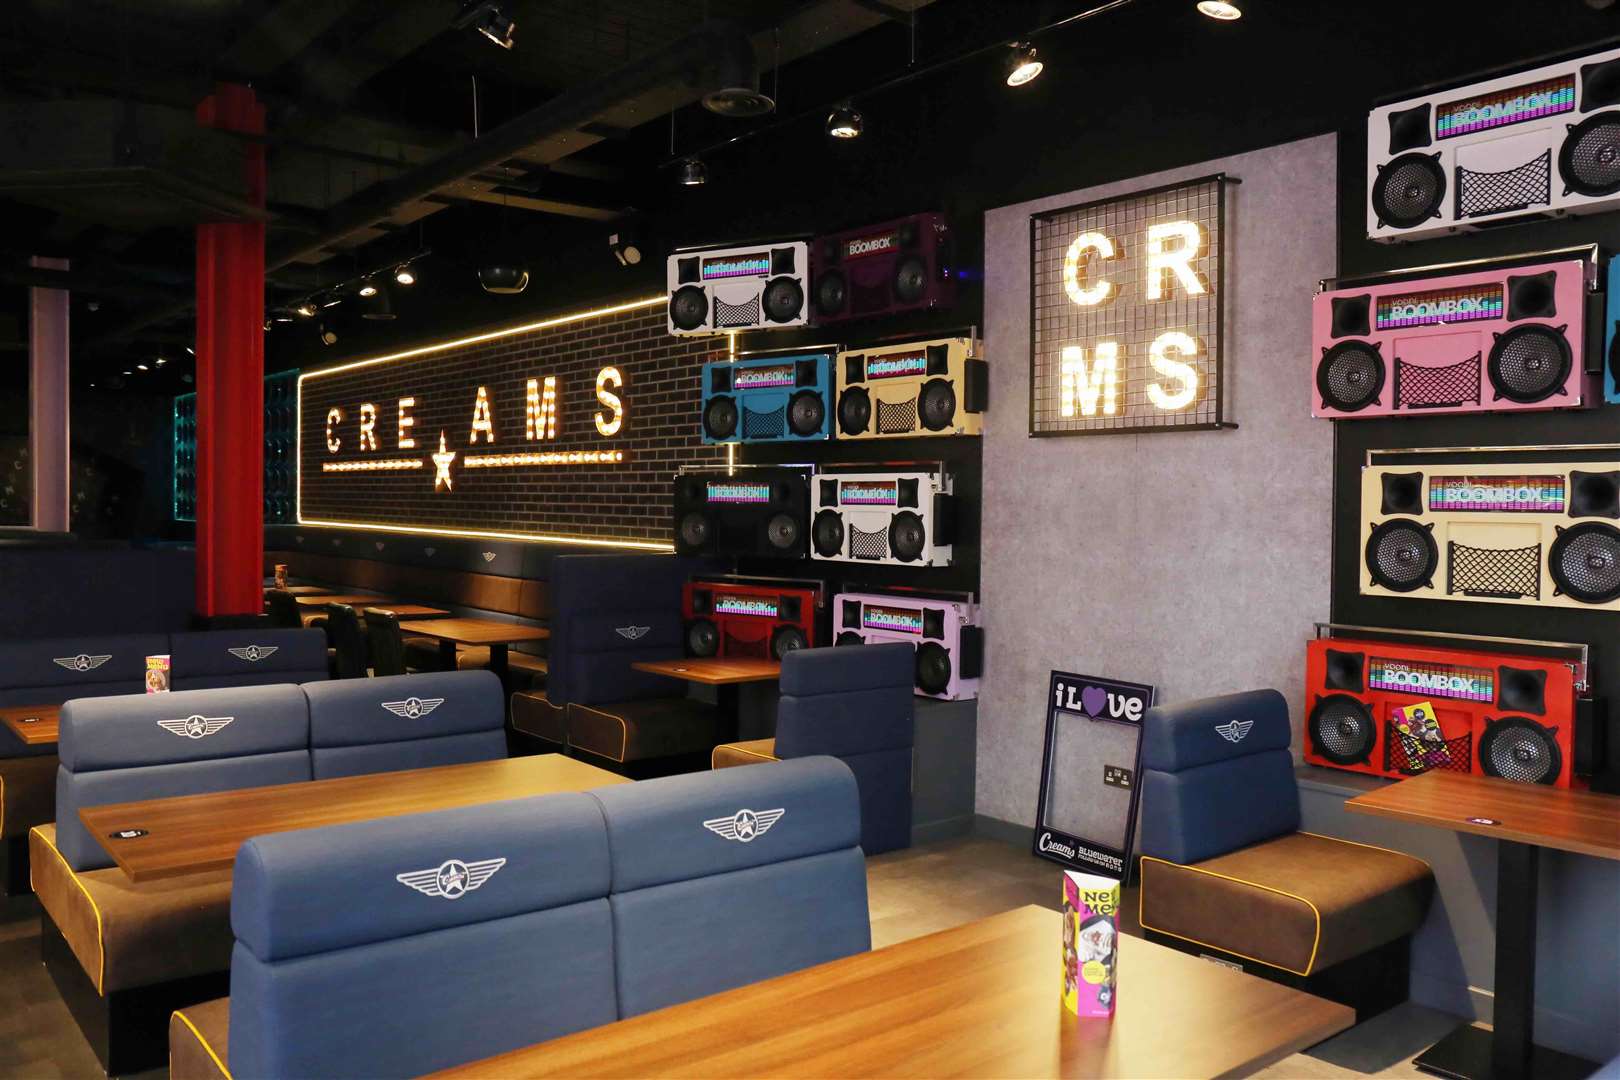 The café will offer 25% off everything from Monday to Wednesday. Picture: Creams Café